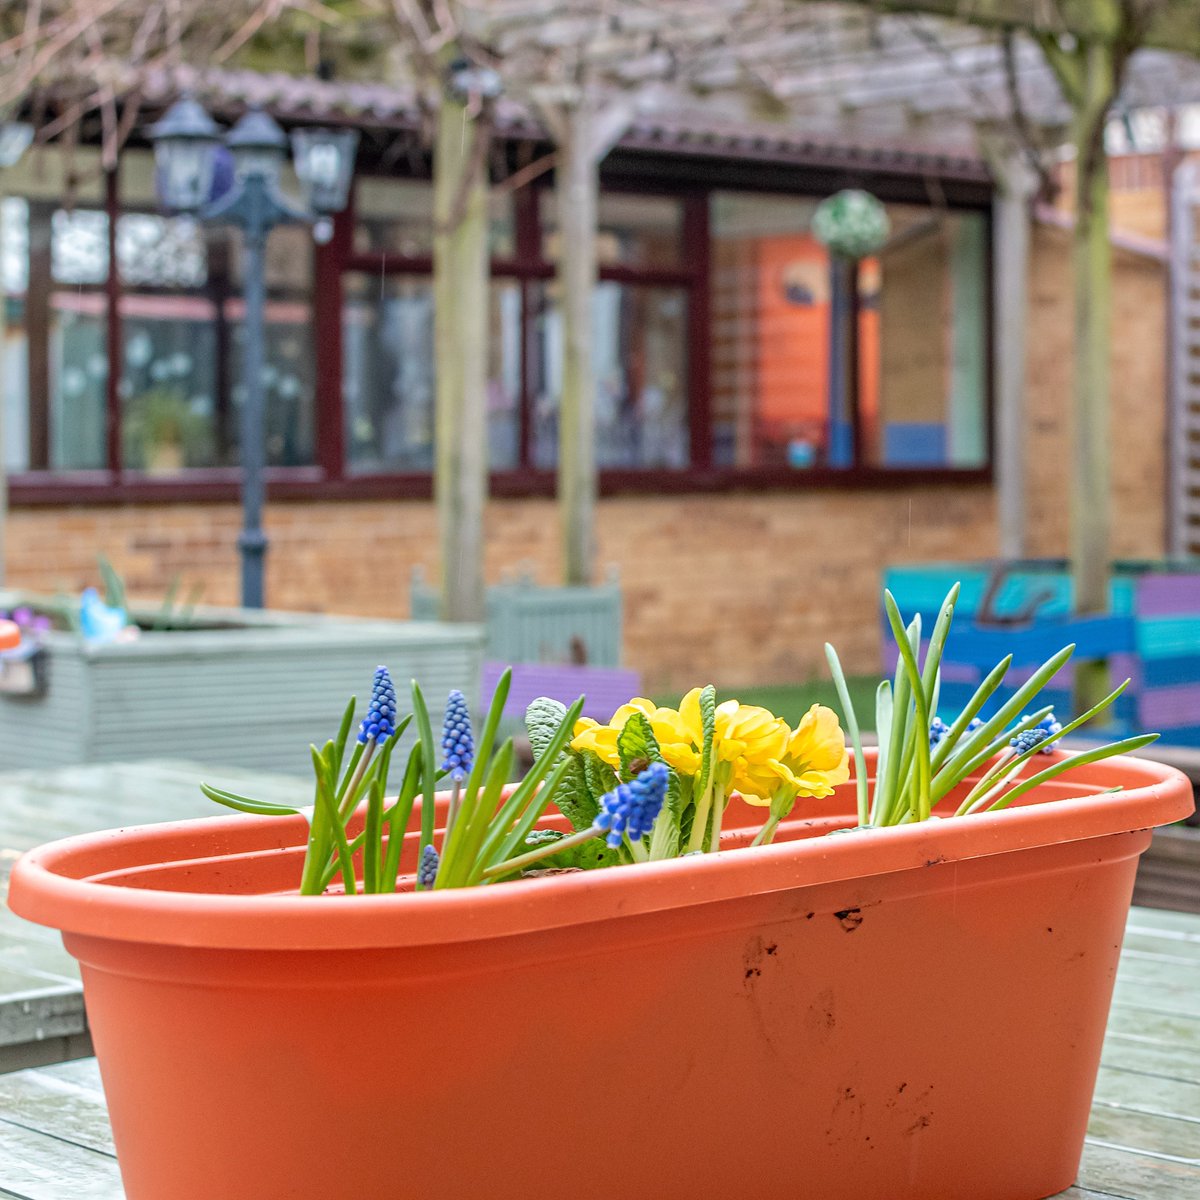 Last Friday, we had our monthly #GrowingSupport session @Brunelcare's Deerhurst Care Home, during which we created apple bird feeders and planted spring bulbs and bedding in troughs. It was great to see so much concentration! 🌱🍏